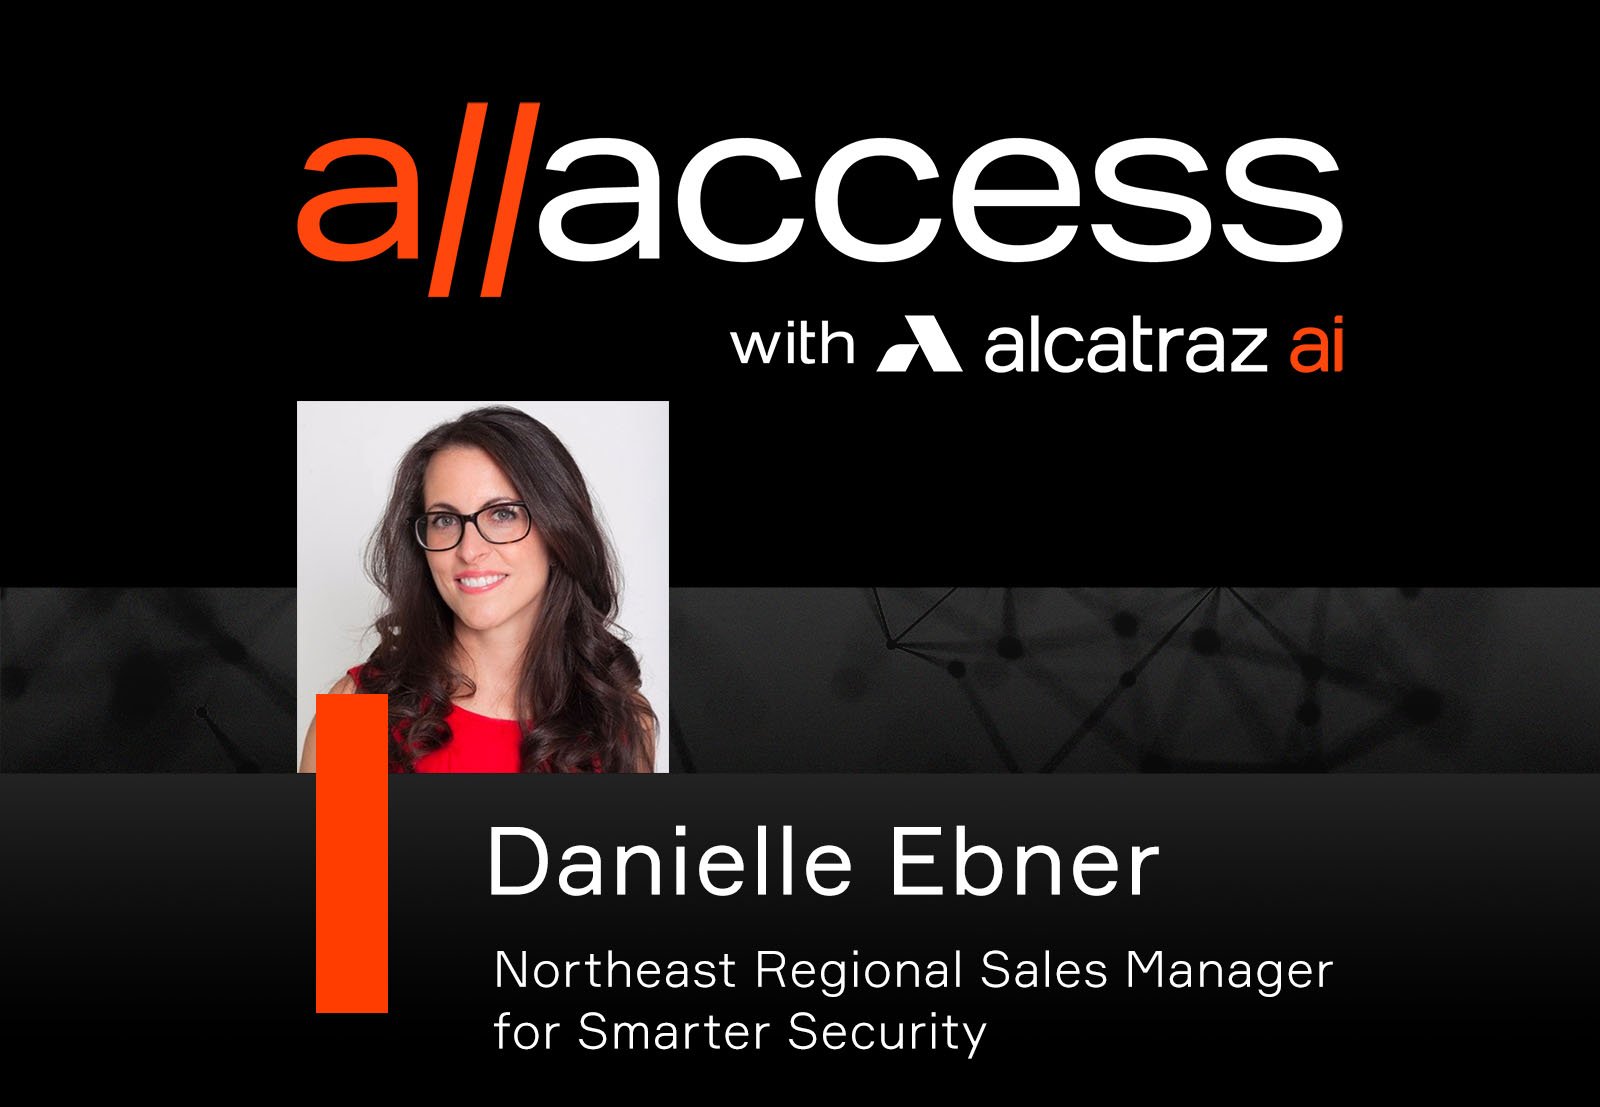 All Access interview with Danielle Ebner from Smarter Security